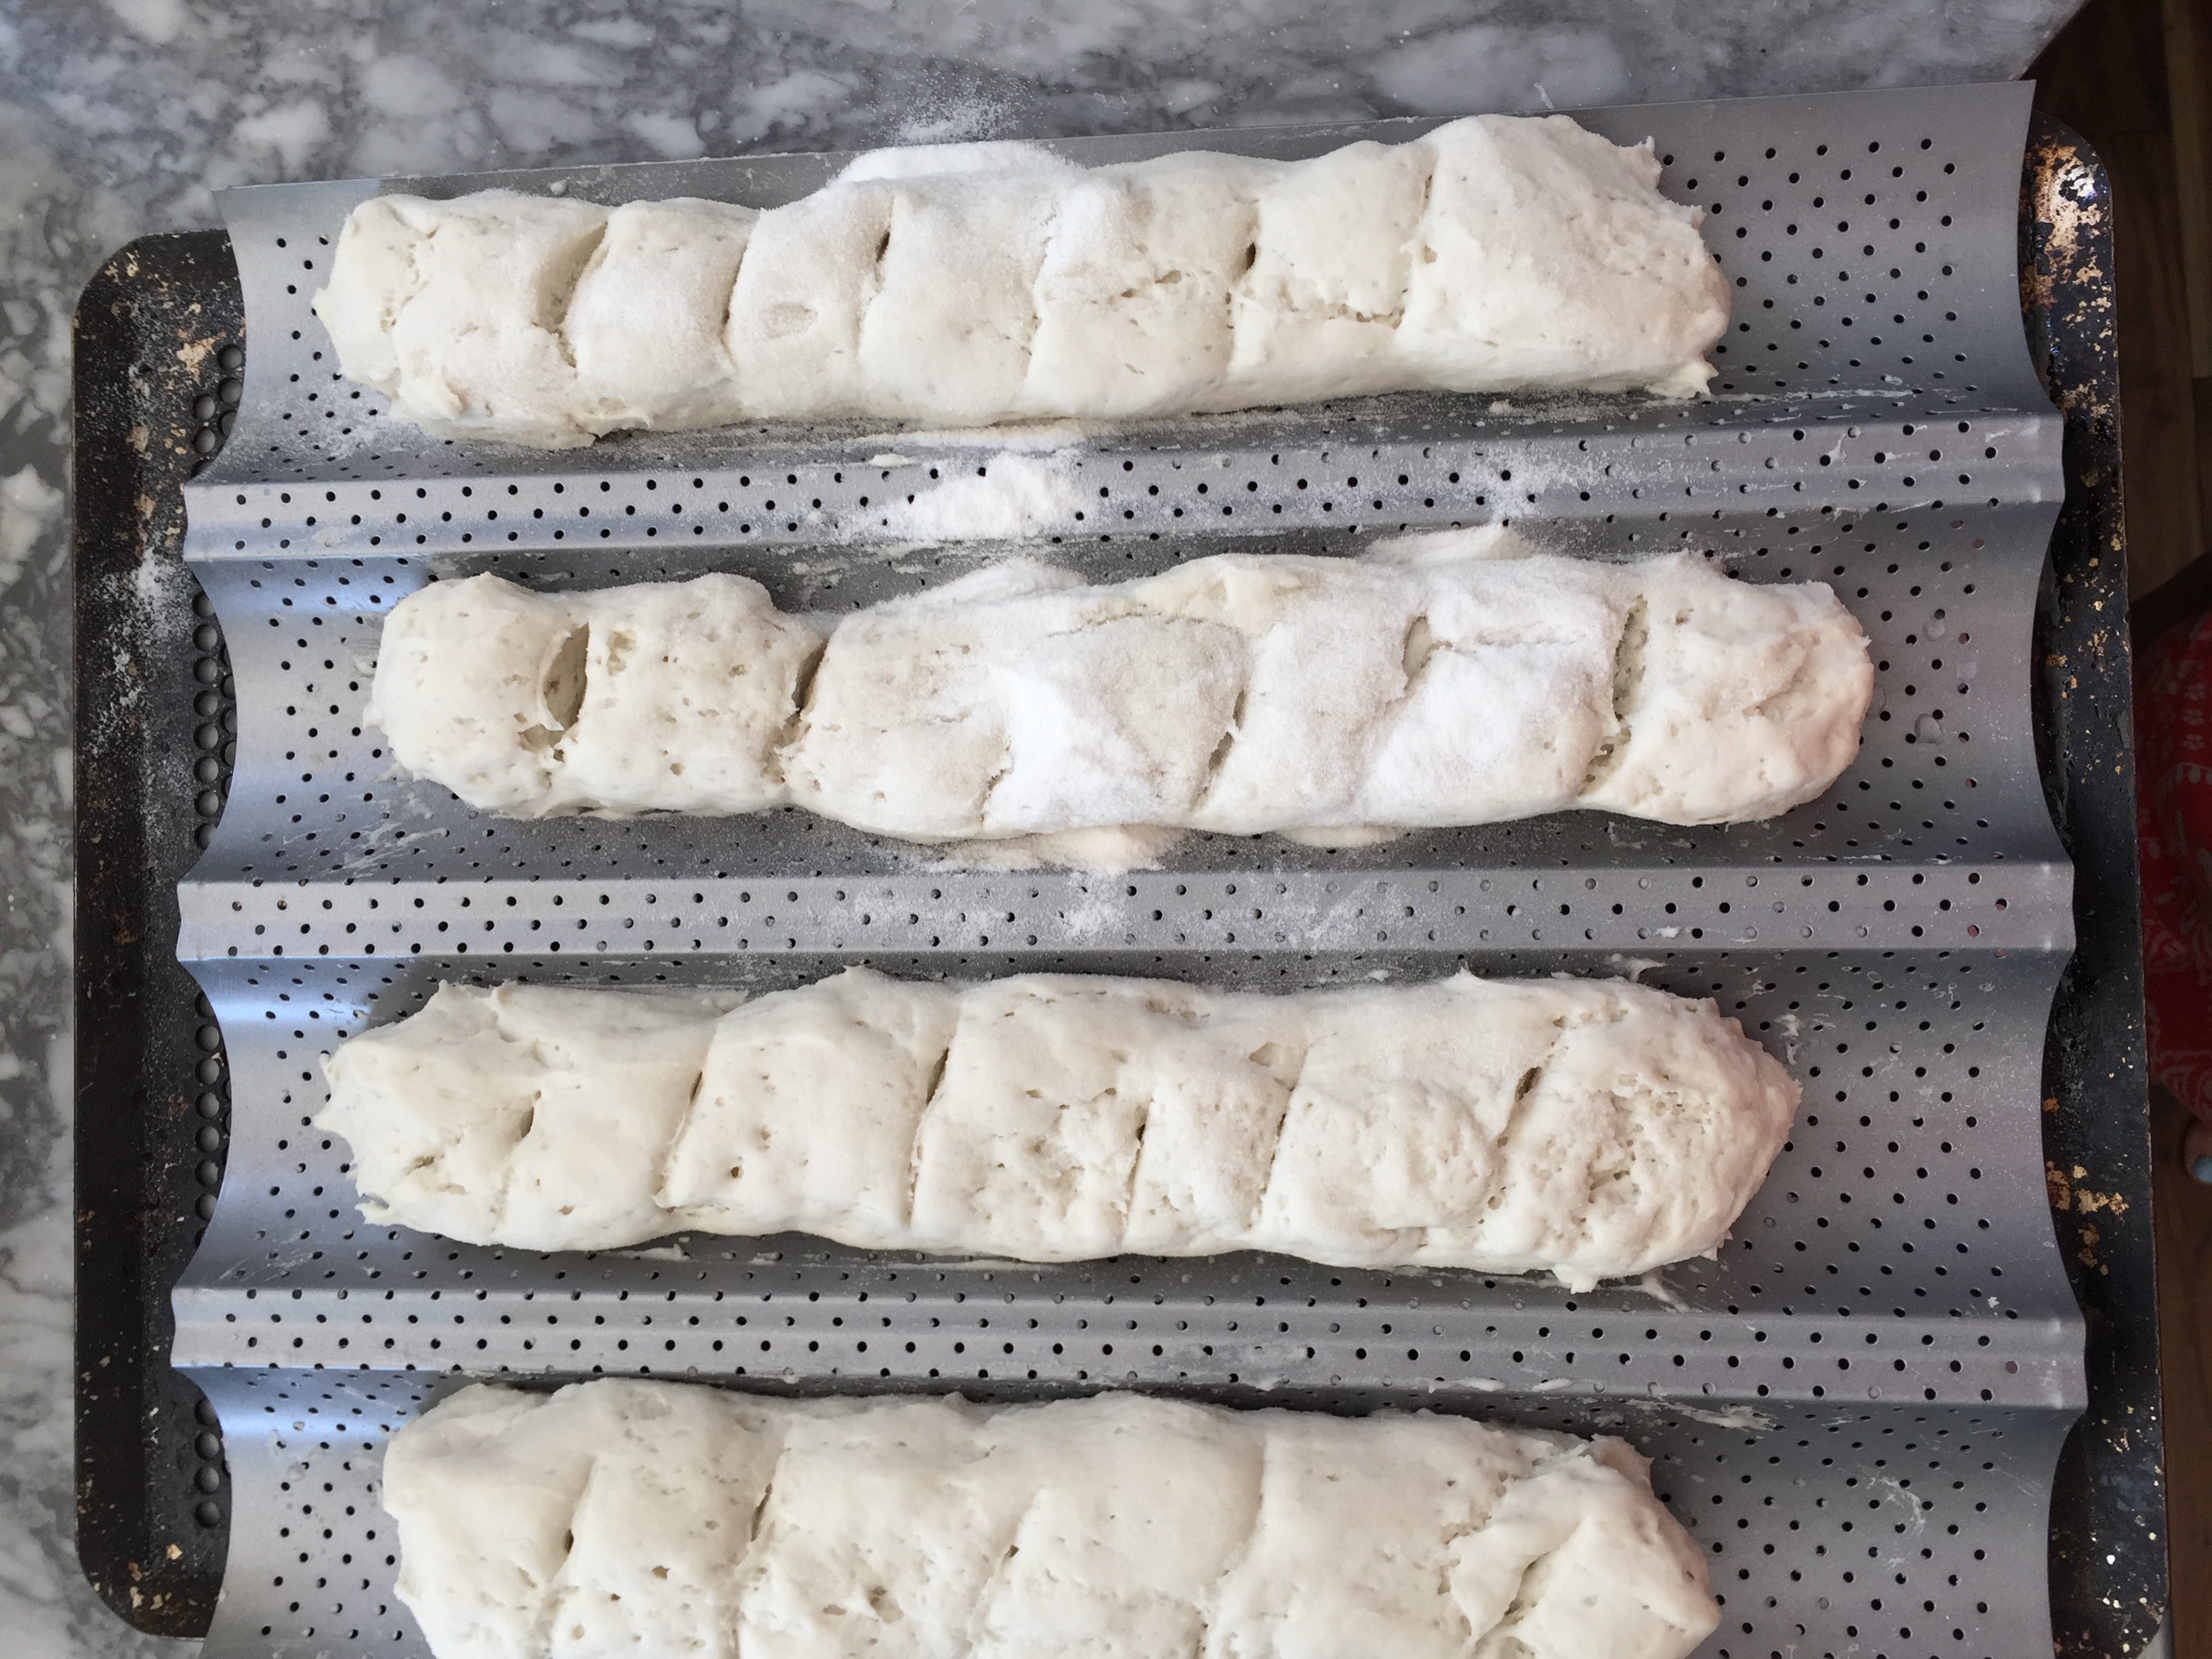 Unbaked Gluten Free French Bread from Spinach Tiger